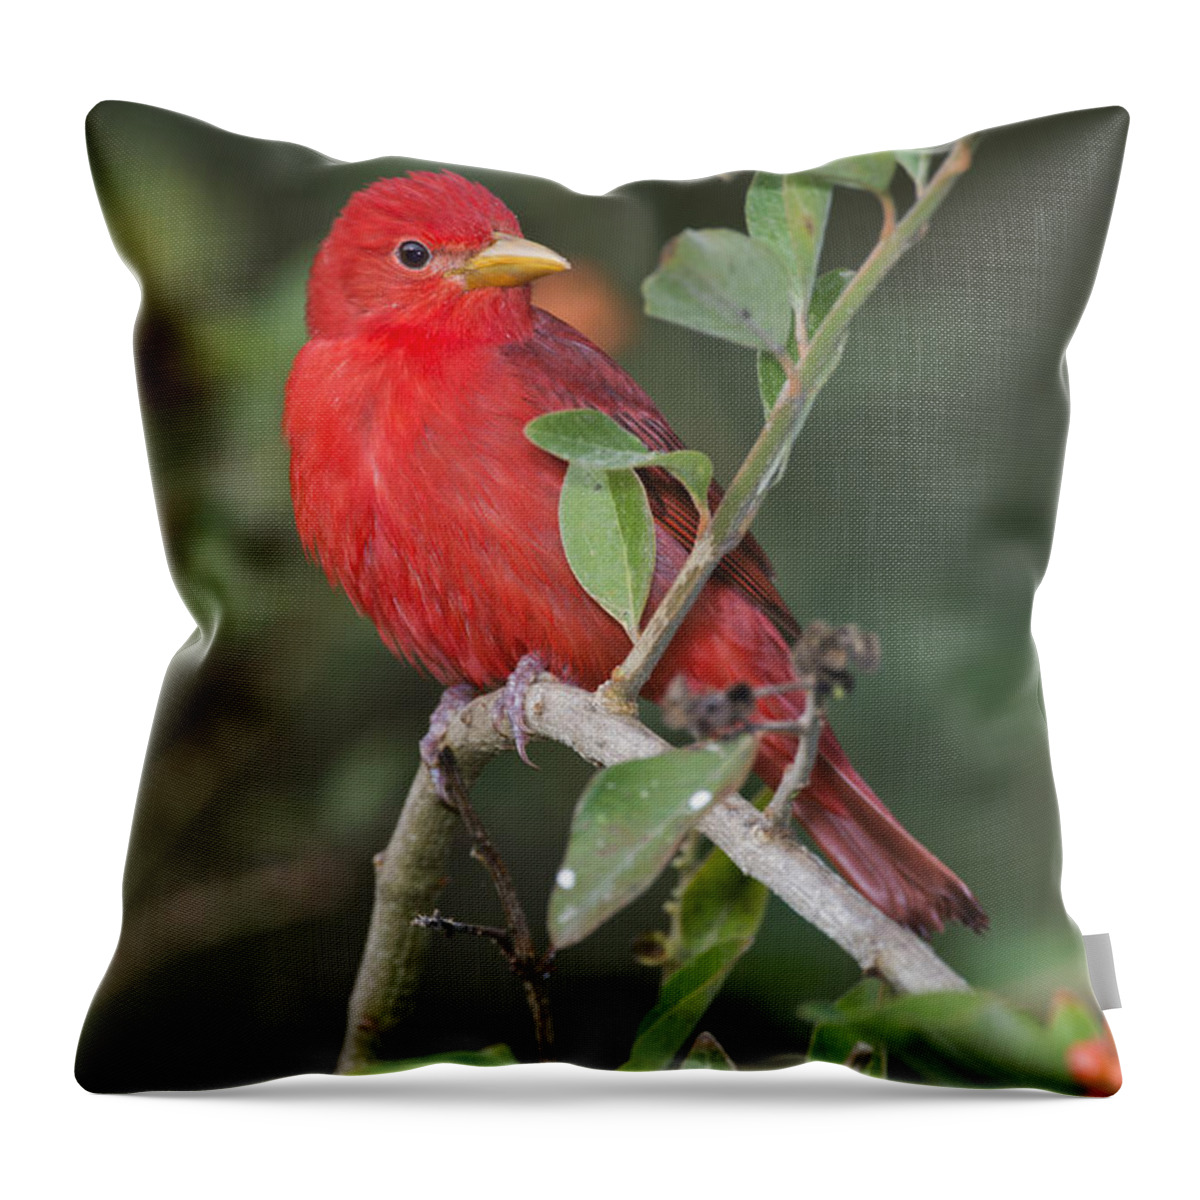 Summer Tanager Throw Pillow featuring the photograph Summer Tanager by Anthony Mercieca